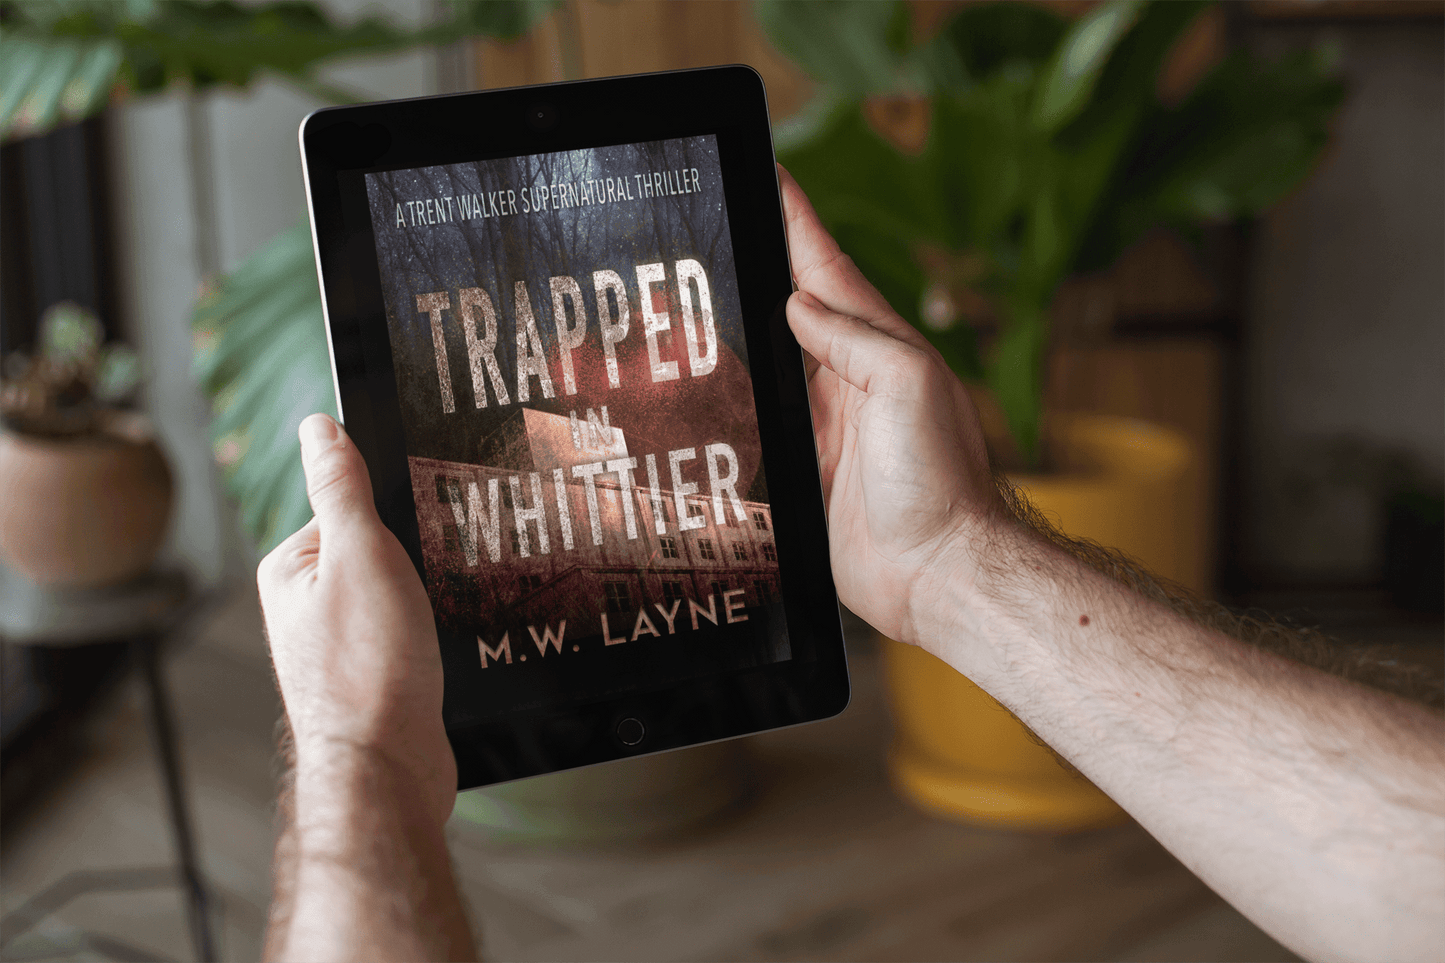 Trapped in Whittier (eBook) - Writer Layne Publishing